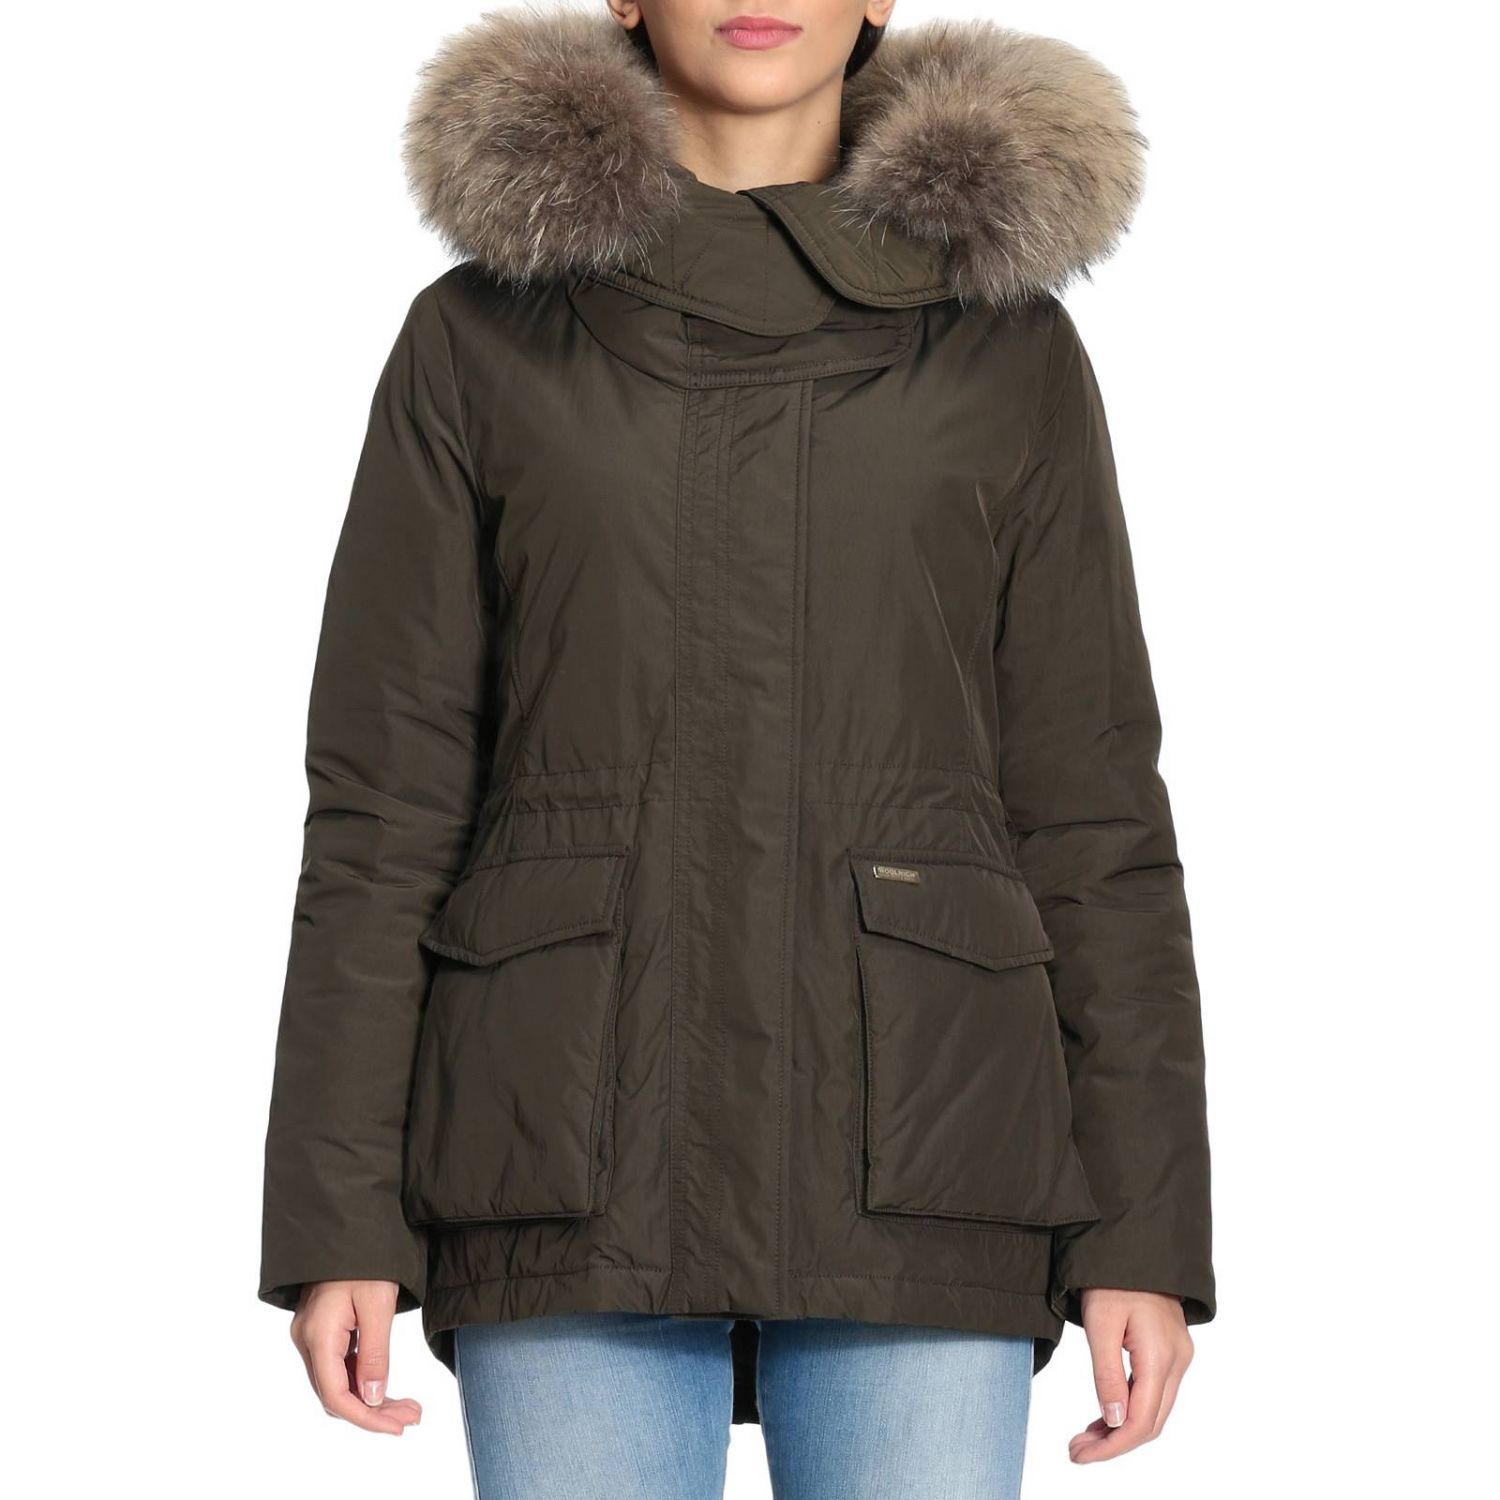 Woolrich Outlet: jacket for woman - Moss Green | Woolrich jacket ...